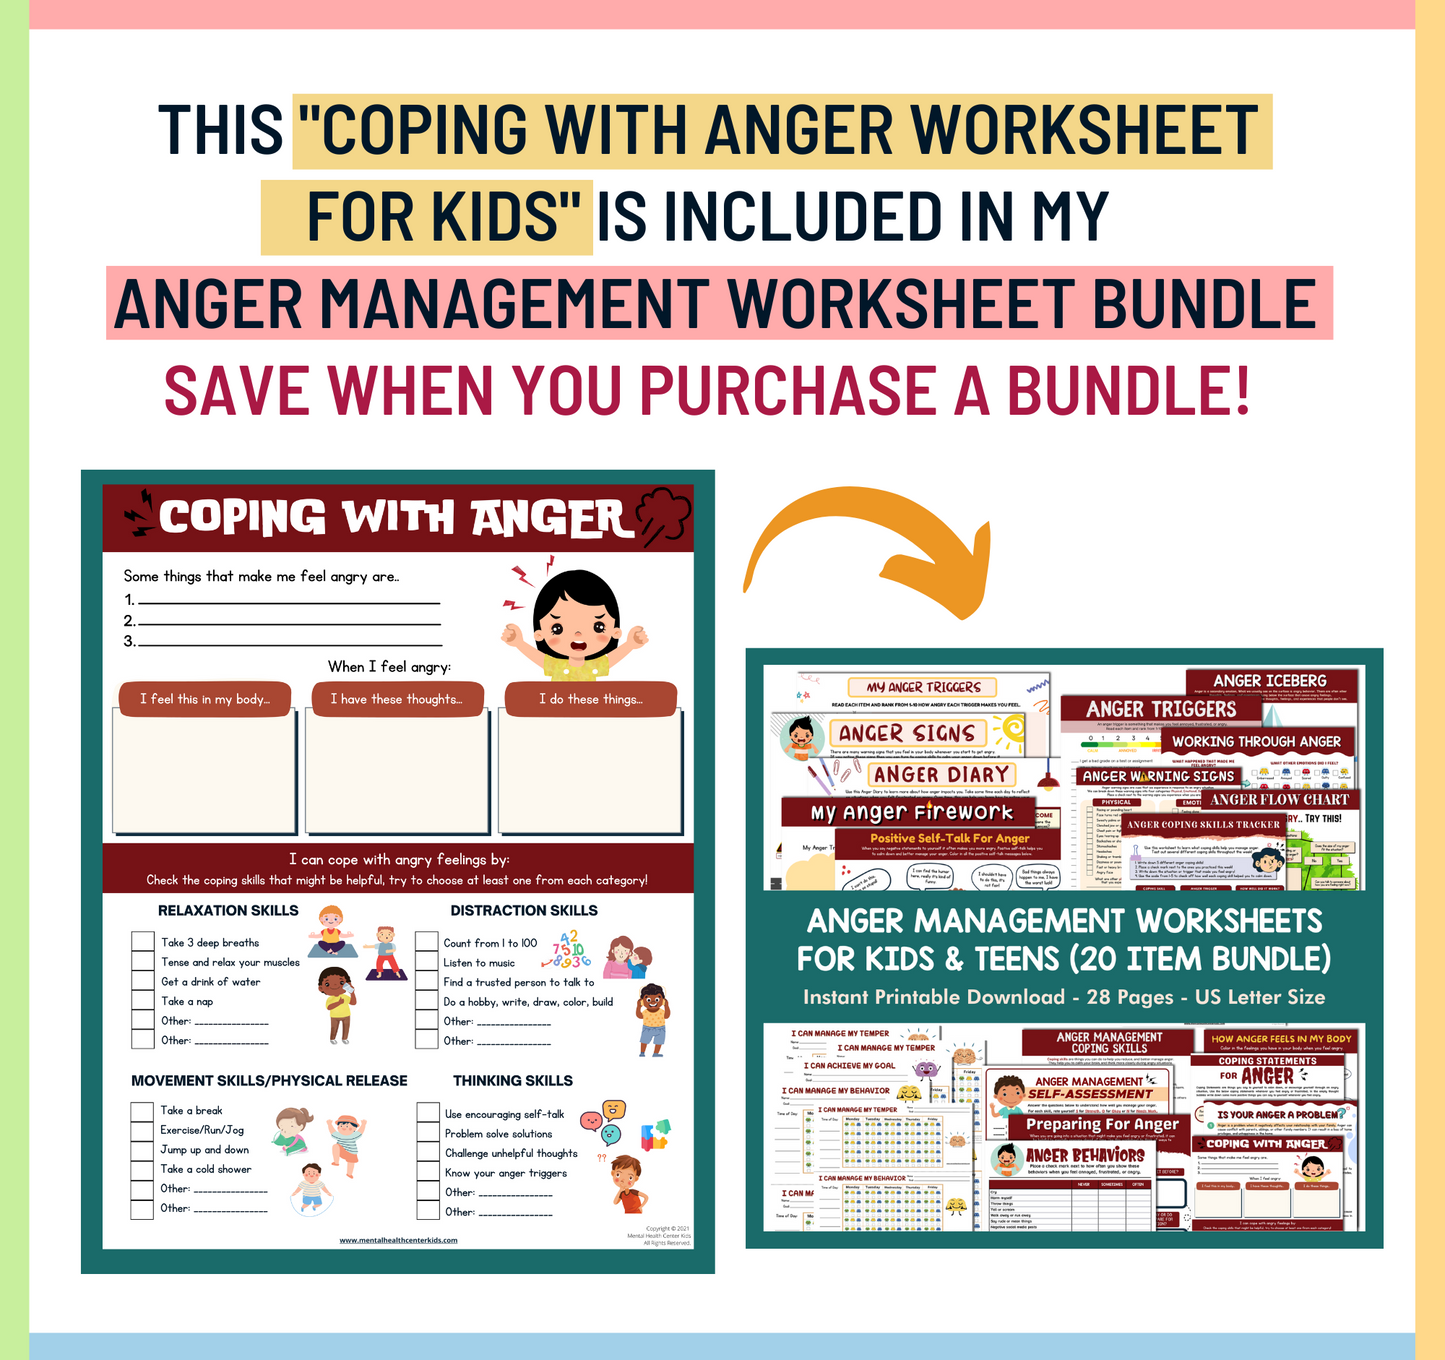 Coping With Anger Worksheet for Kids